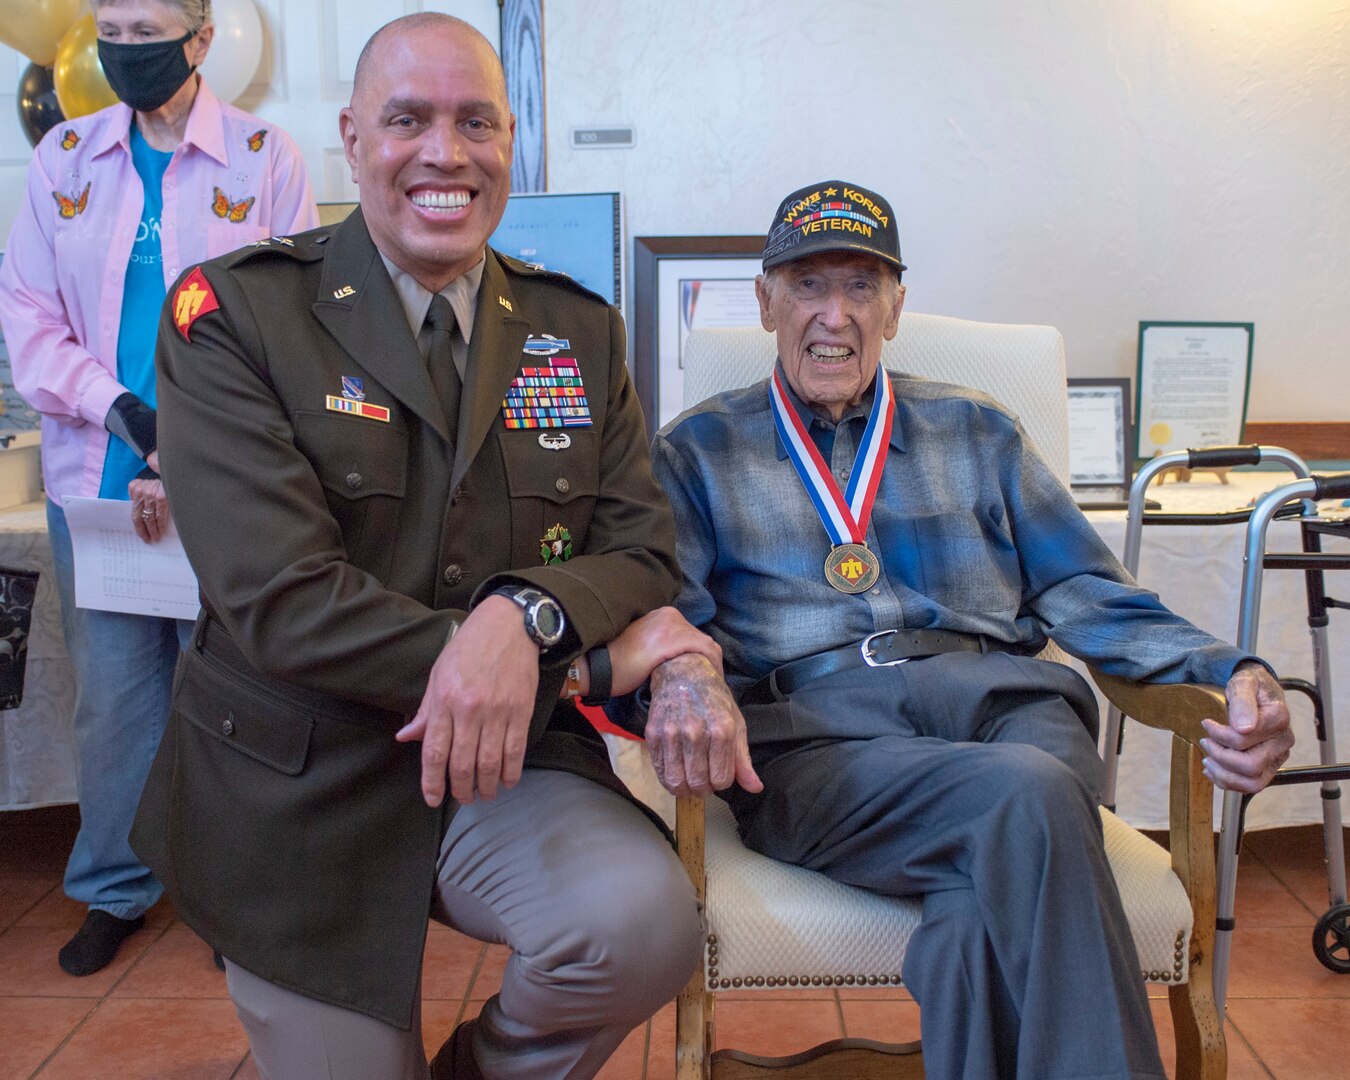 Maj. Gen. Michael Thompson, adjutant general for Oklahoma, poses with Lt. Col. (Ret.) Oren L. Peters, World War II and Korean War Veteran from the renowned 45th Infantry Division, Saturday, April 10, 2021, during a Thunderbird Medal presentation ceremony. The Thunderbird Medal is the Oklahoma National Guard’s highest award presented to a civilian and was presented to Peters for his distinguished military service. (Oklahoma National Guard photo by Lt. Col. Geoff Legler)